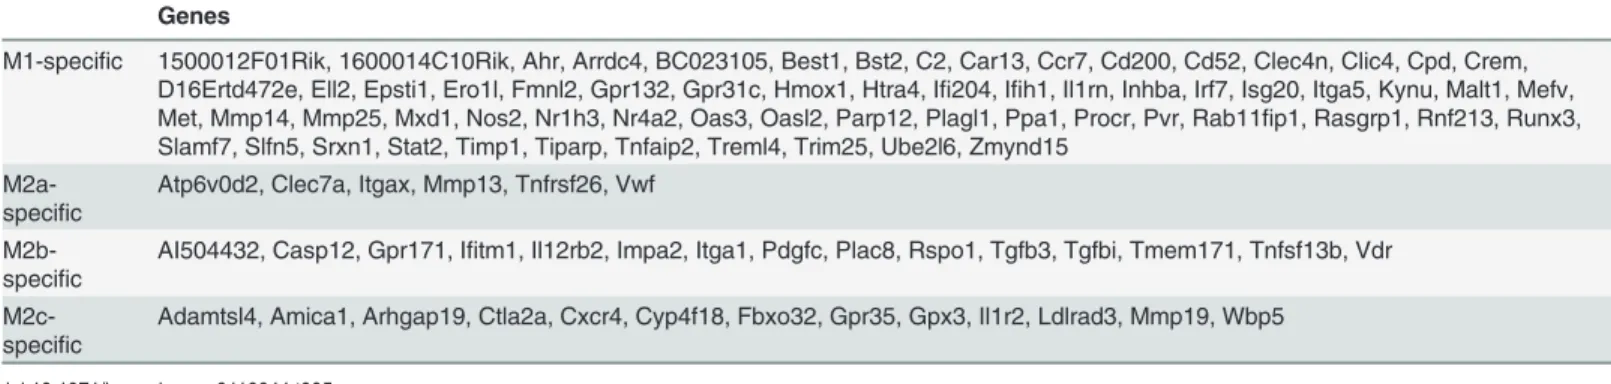 Table 5. M1 and M2a,b,c-speci ﬁ c genes that are &gt; 2-fold upregulated in our GAMs data set.